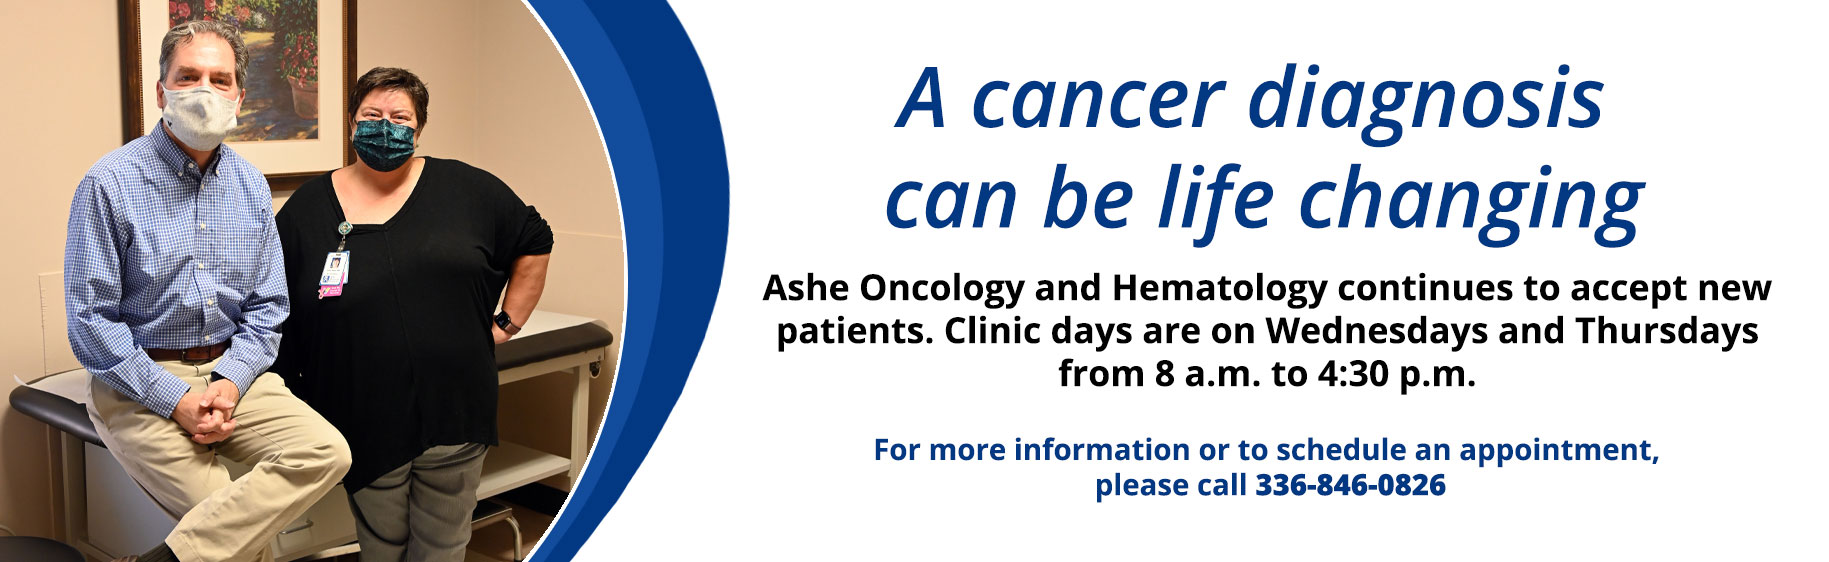 Banner picture of a female and male wearing mask but smiling under them. 
Banner says:
A Cancer diagnosis can be life changing
Ashe Oncology and Hematology continues to accept new patients. Clinic days are on Wednesday and Thursdays from 8 a.m. to 4:30 p.m.

For more information or to schedule an appointment, please call 336-846-0826